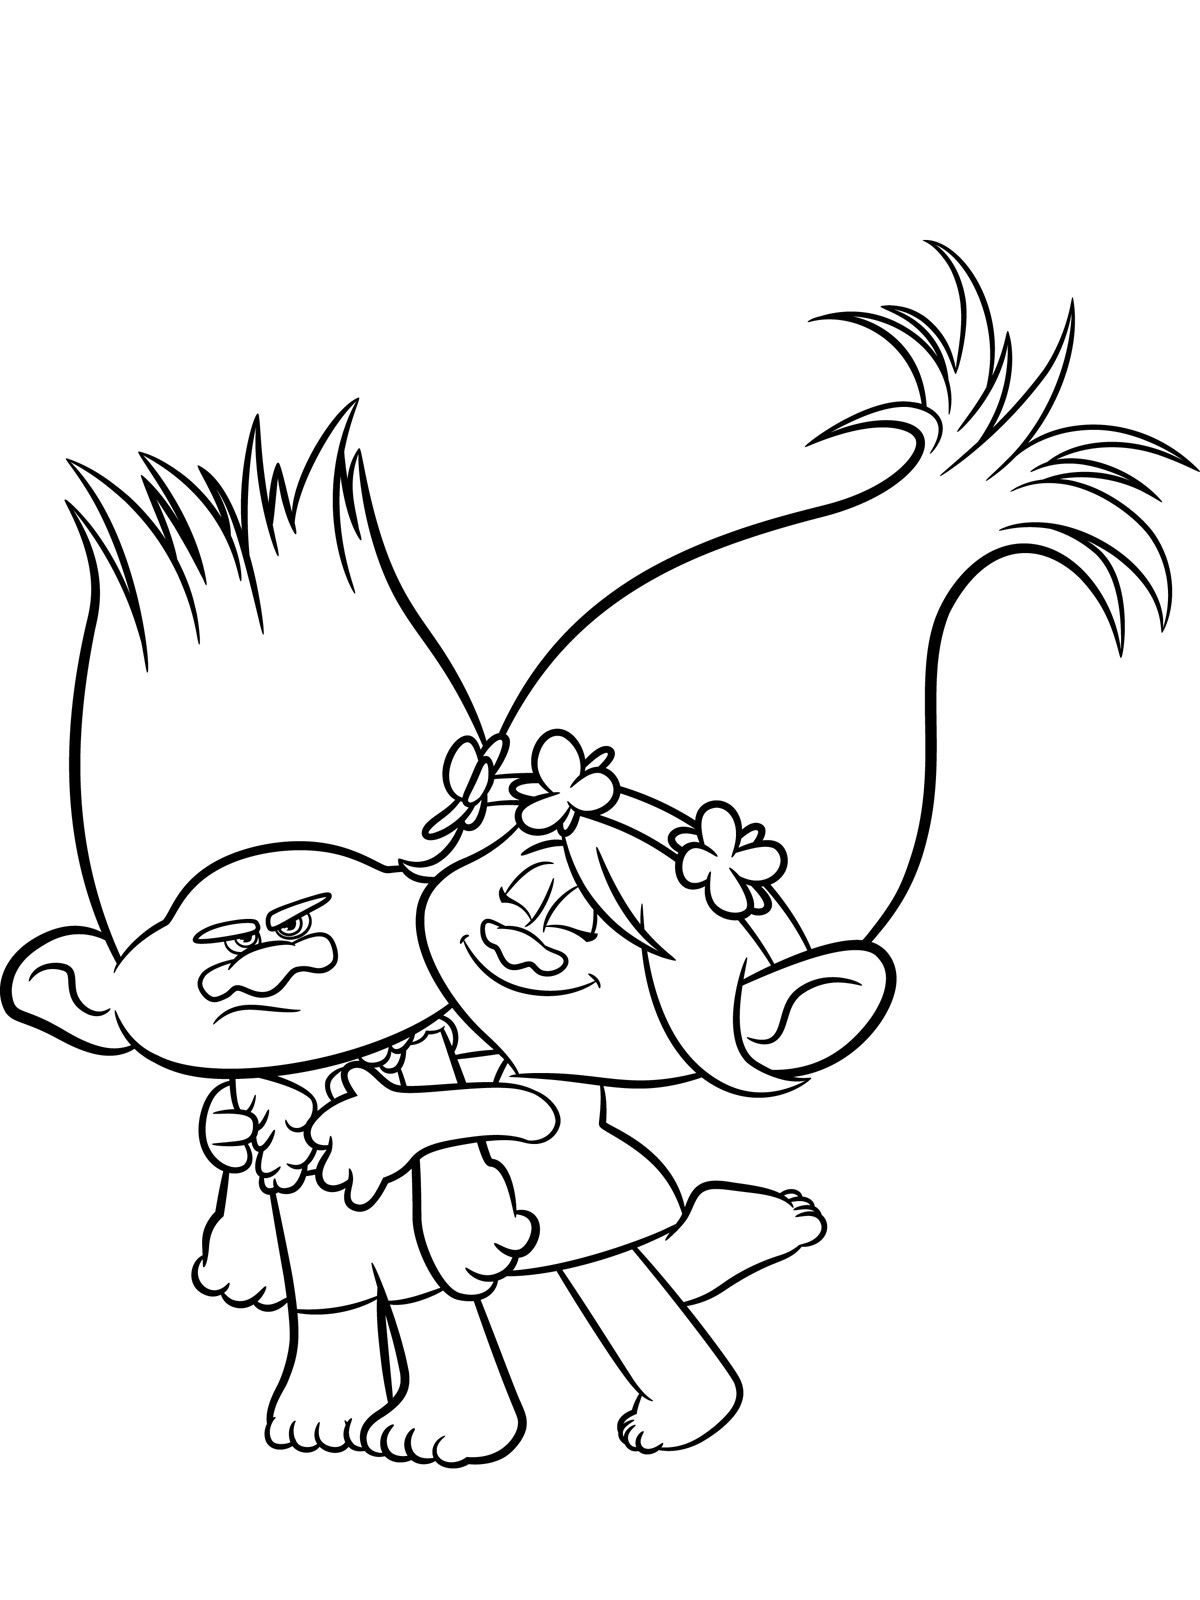 Trolls Printable Coloring Pages
 Troll Coloring Pages Cute Coloring Pages